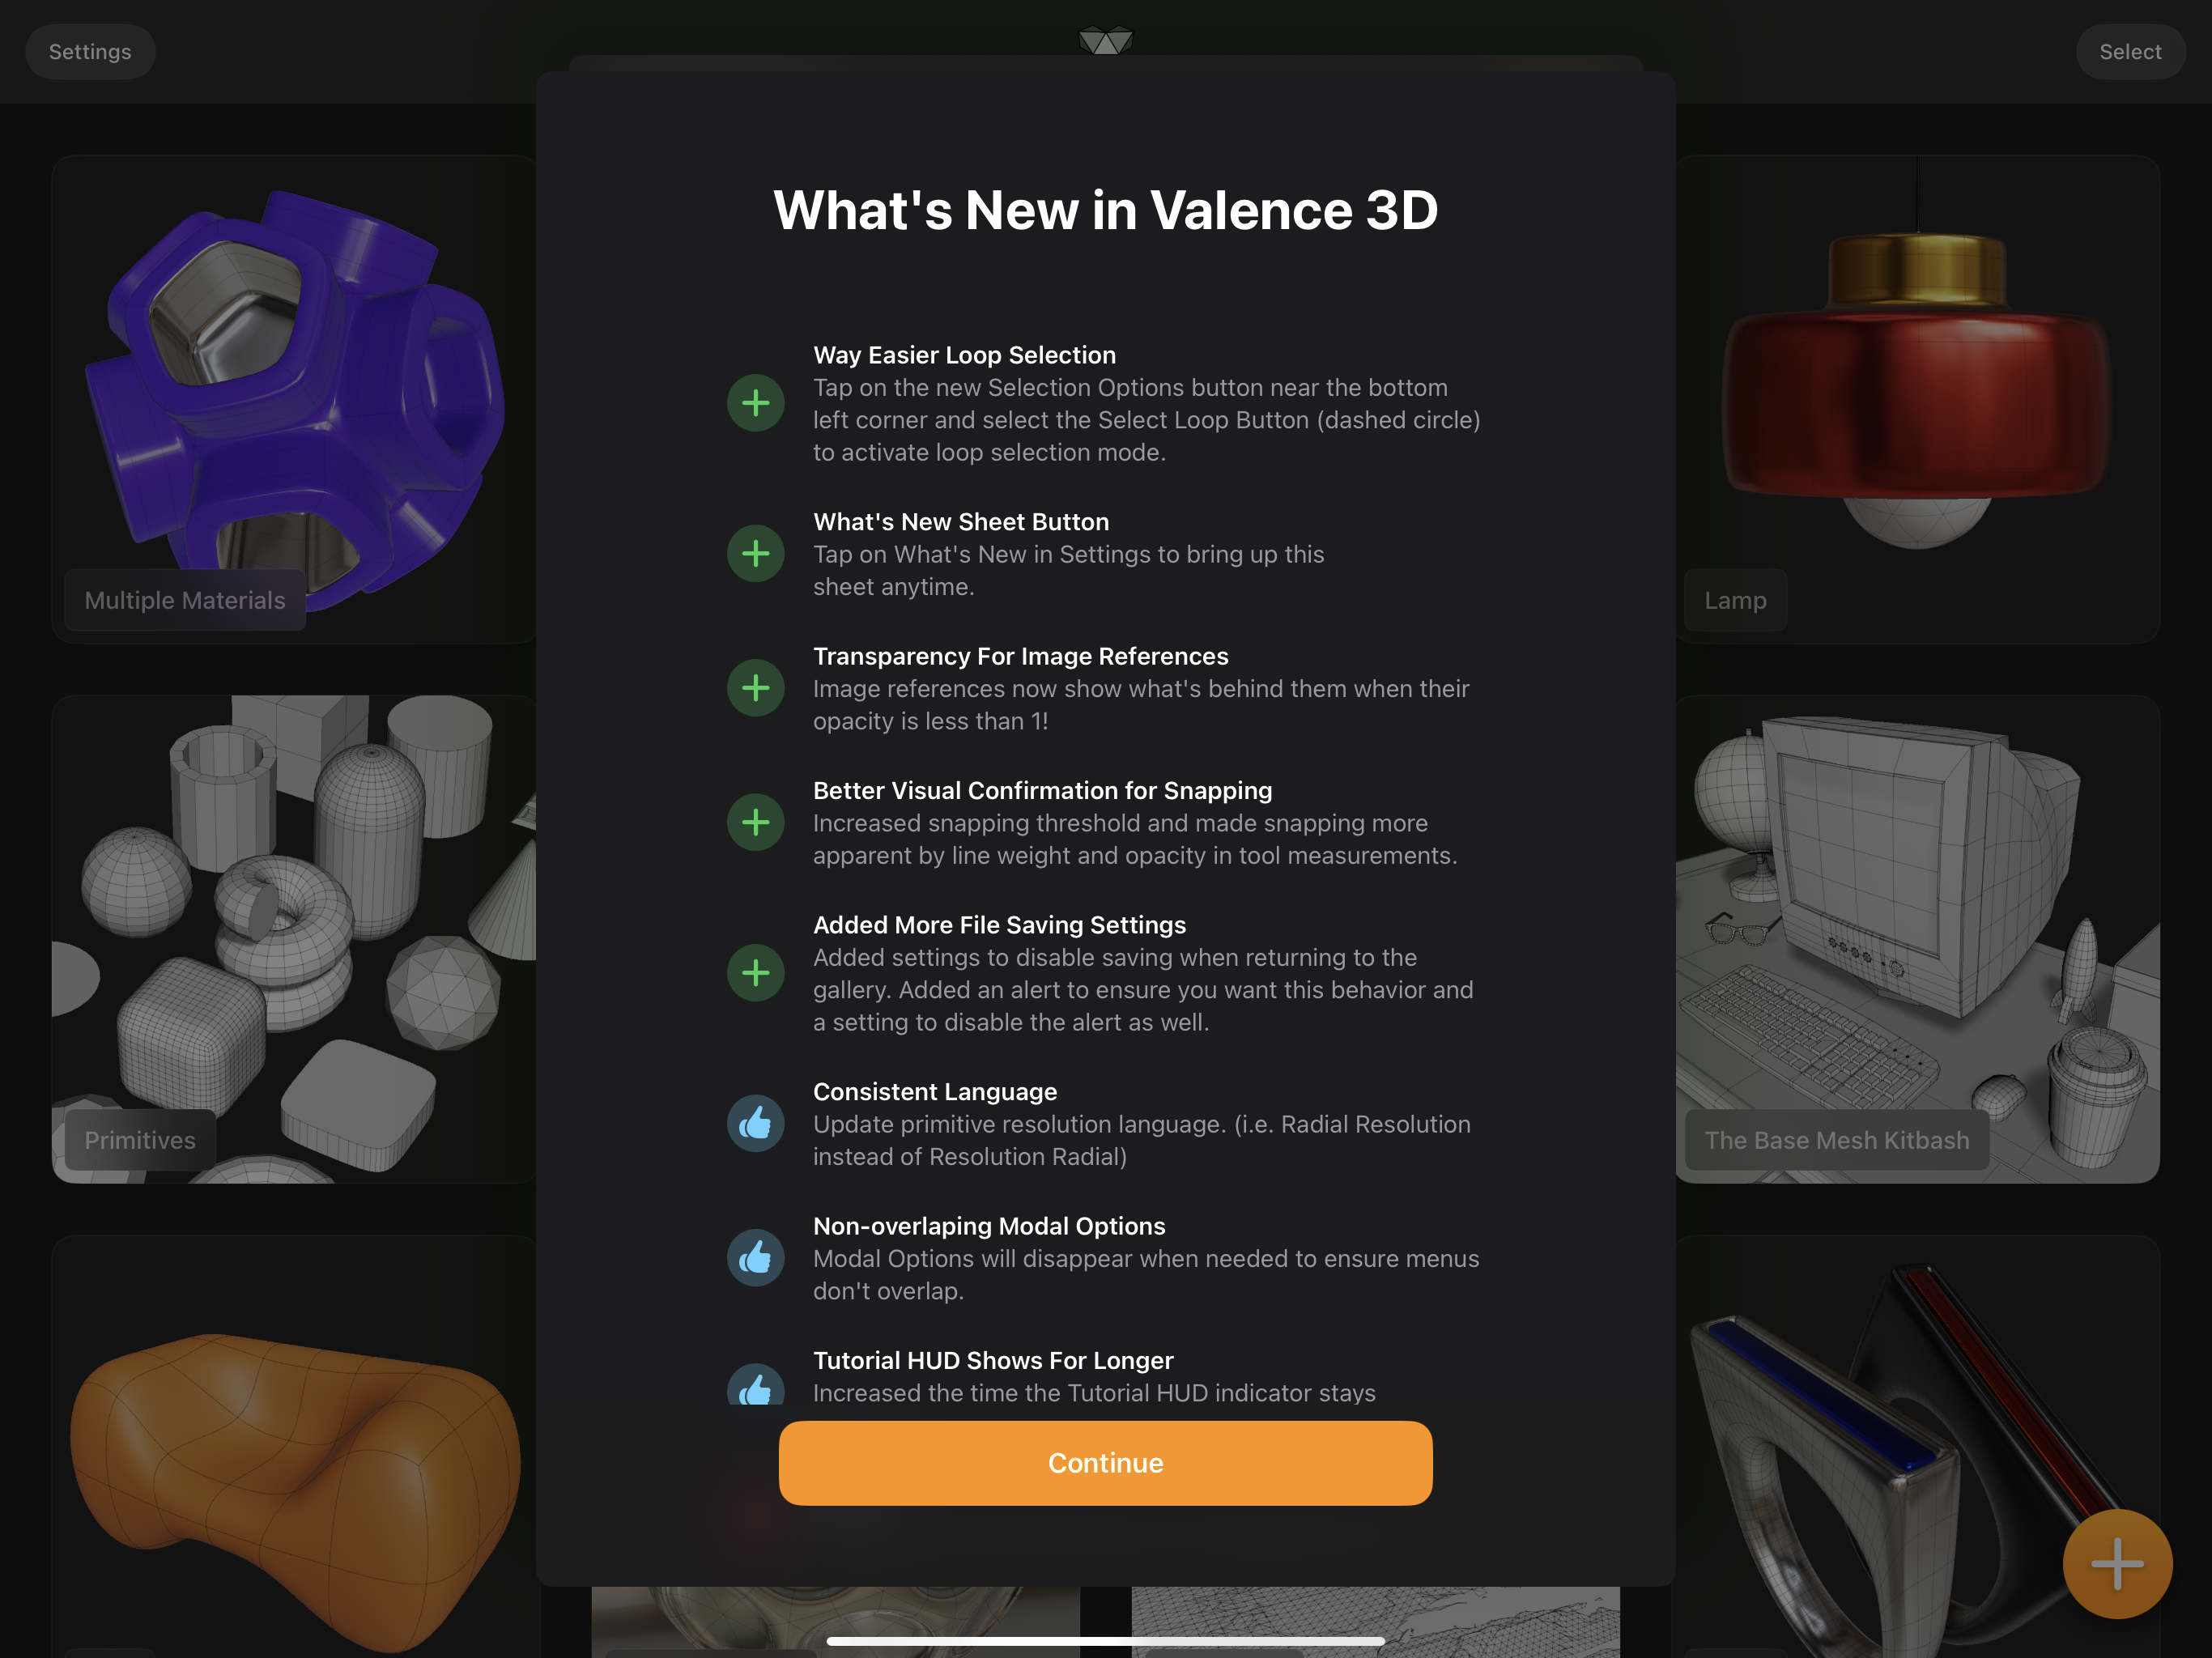 Valence 3D App What's New